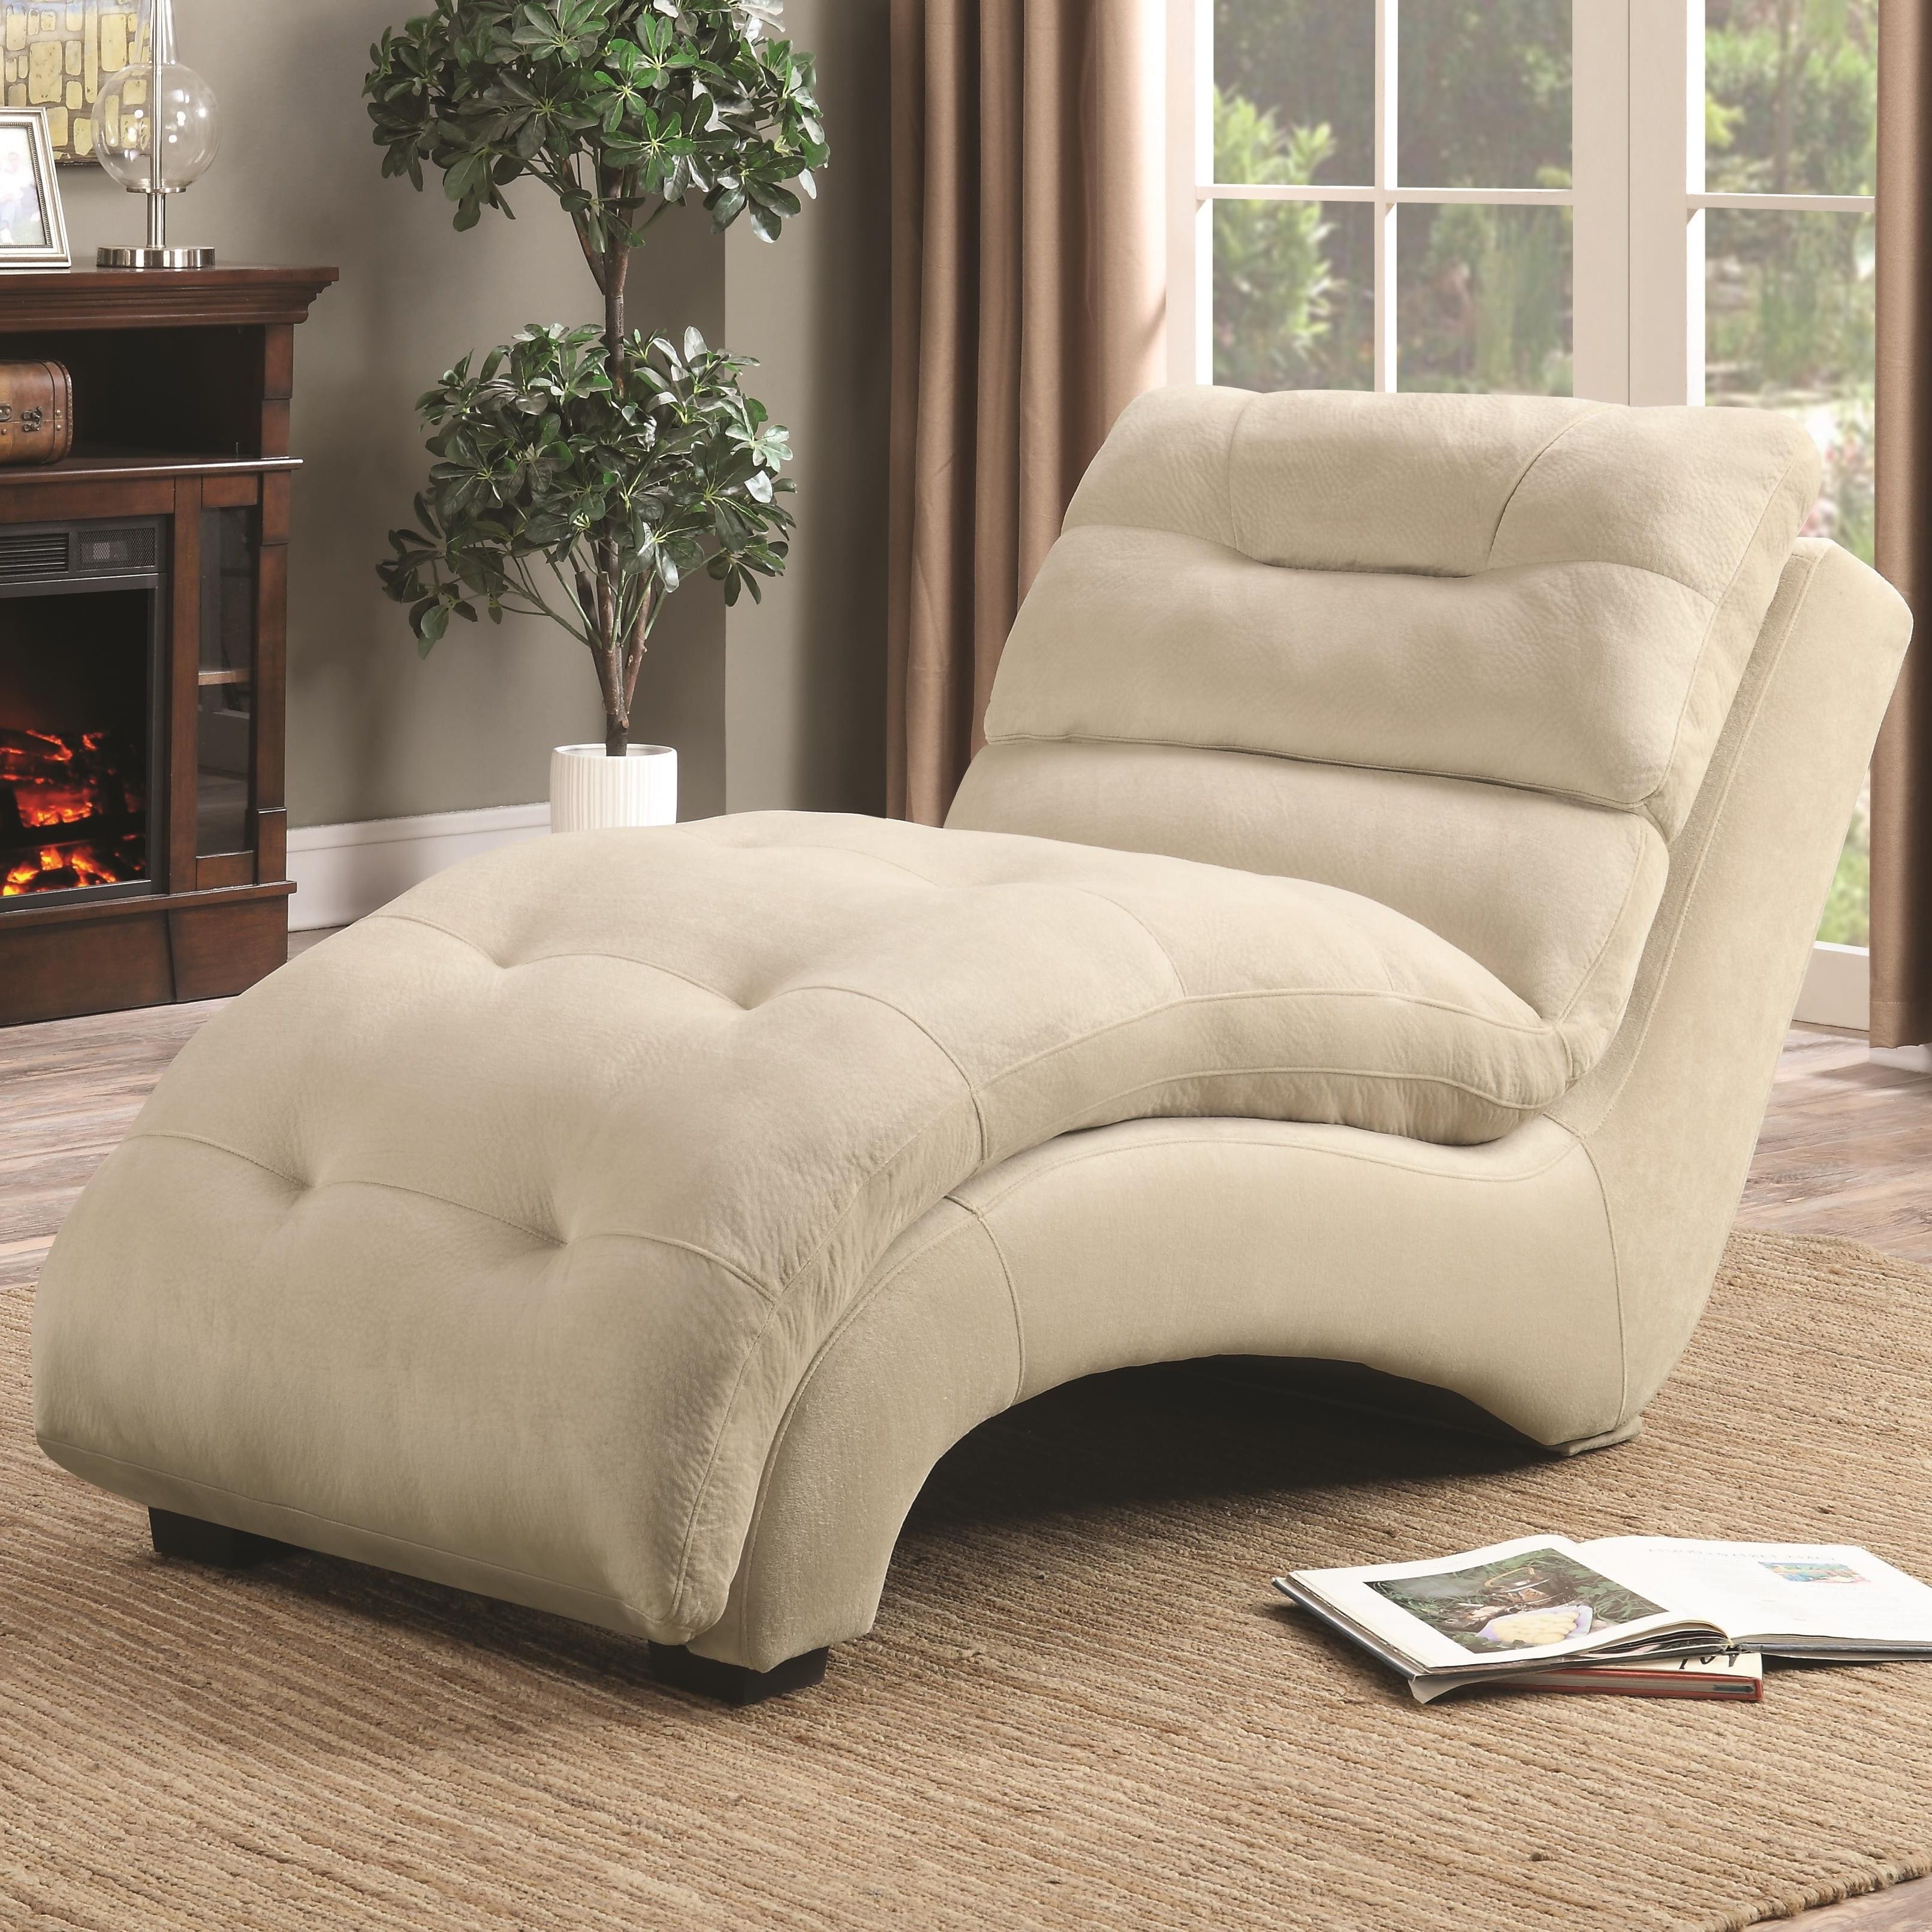 Coaster 550347 Accent Chaise With Arched Base In Tan Padded Upholstery Throughout Most Popular Coaster Chaise Lounges (View 1 of 15)